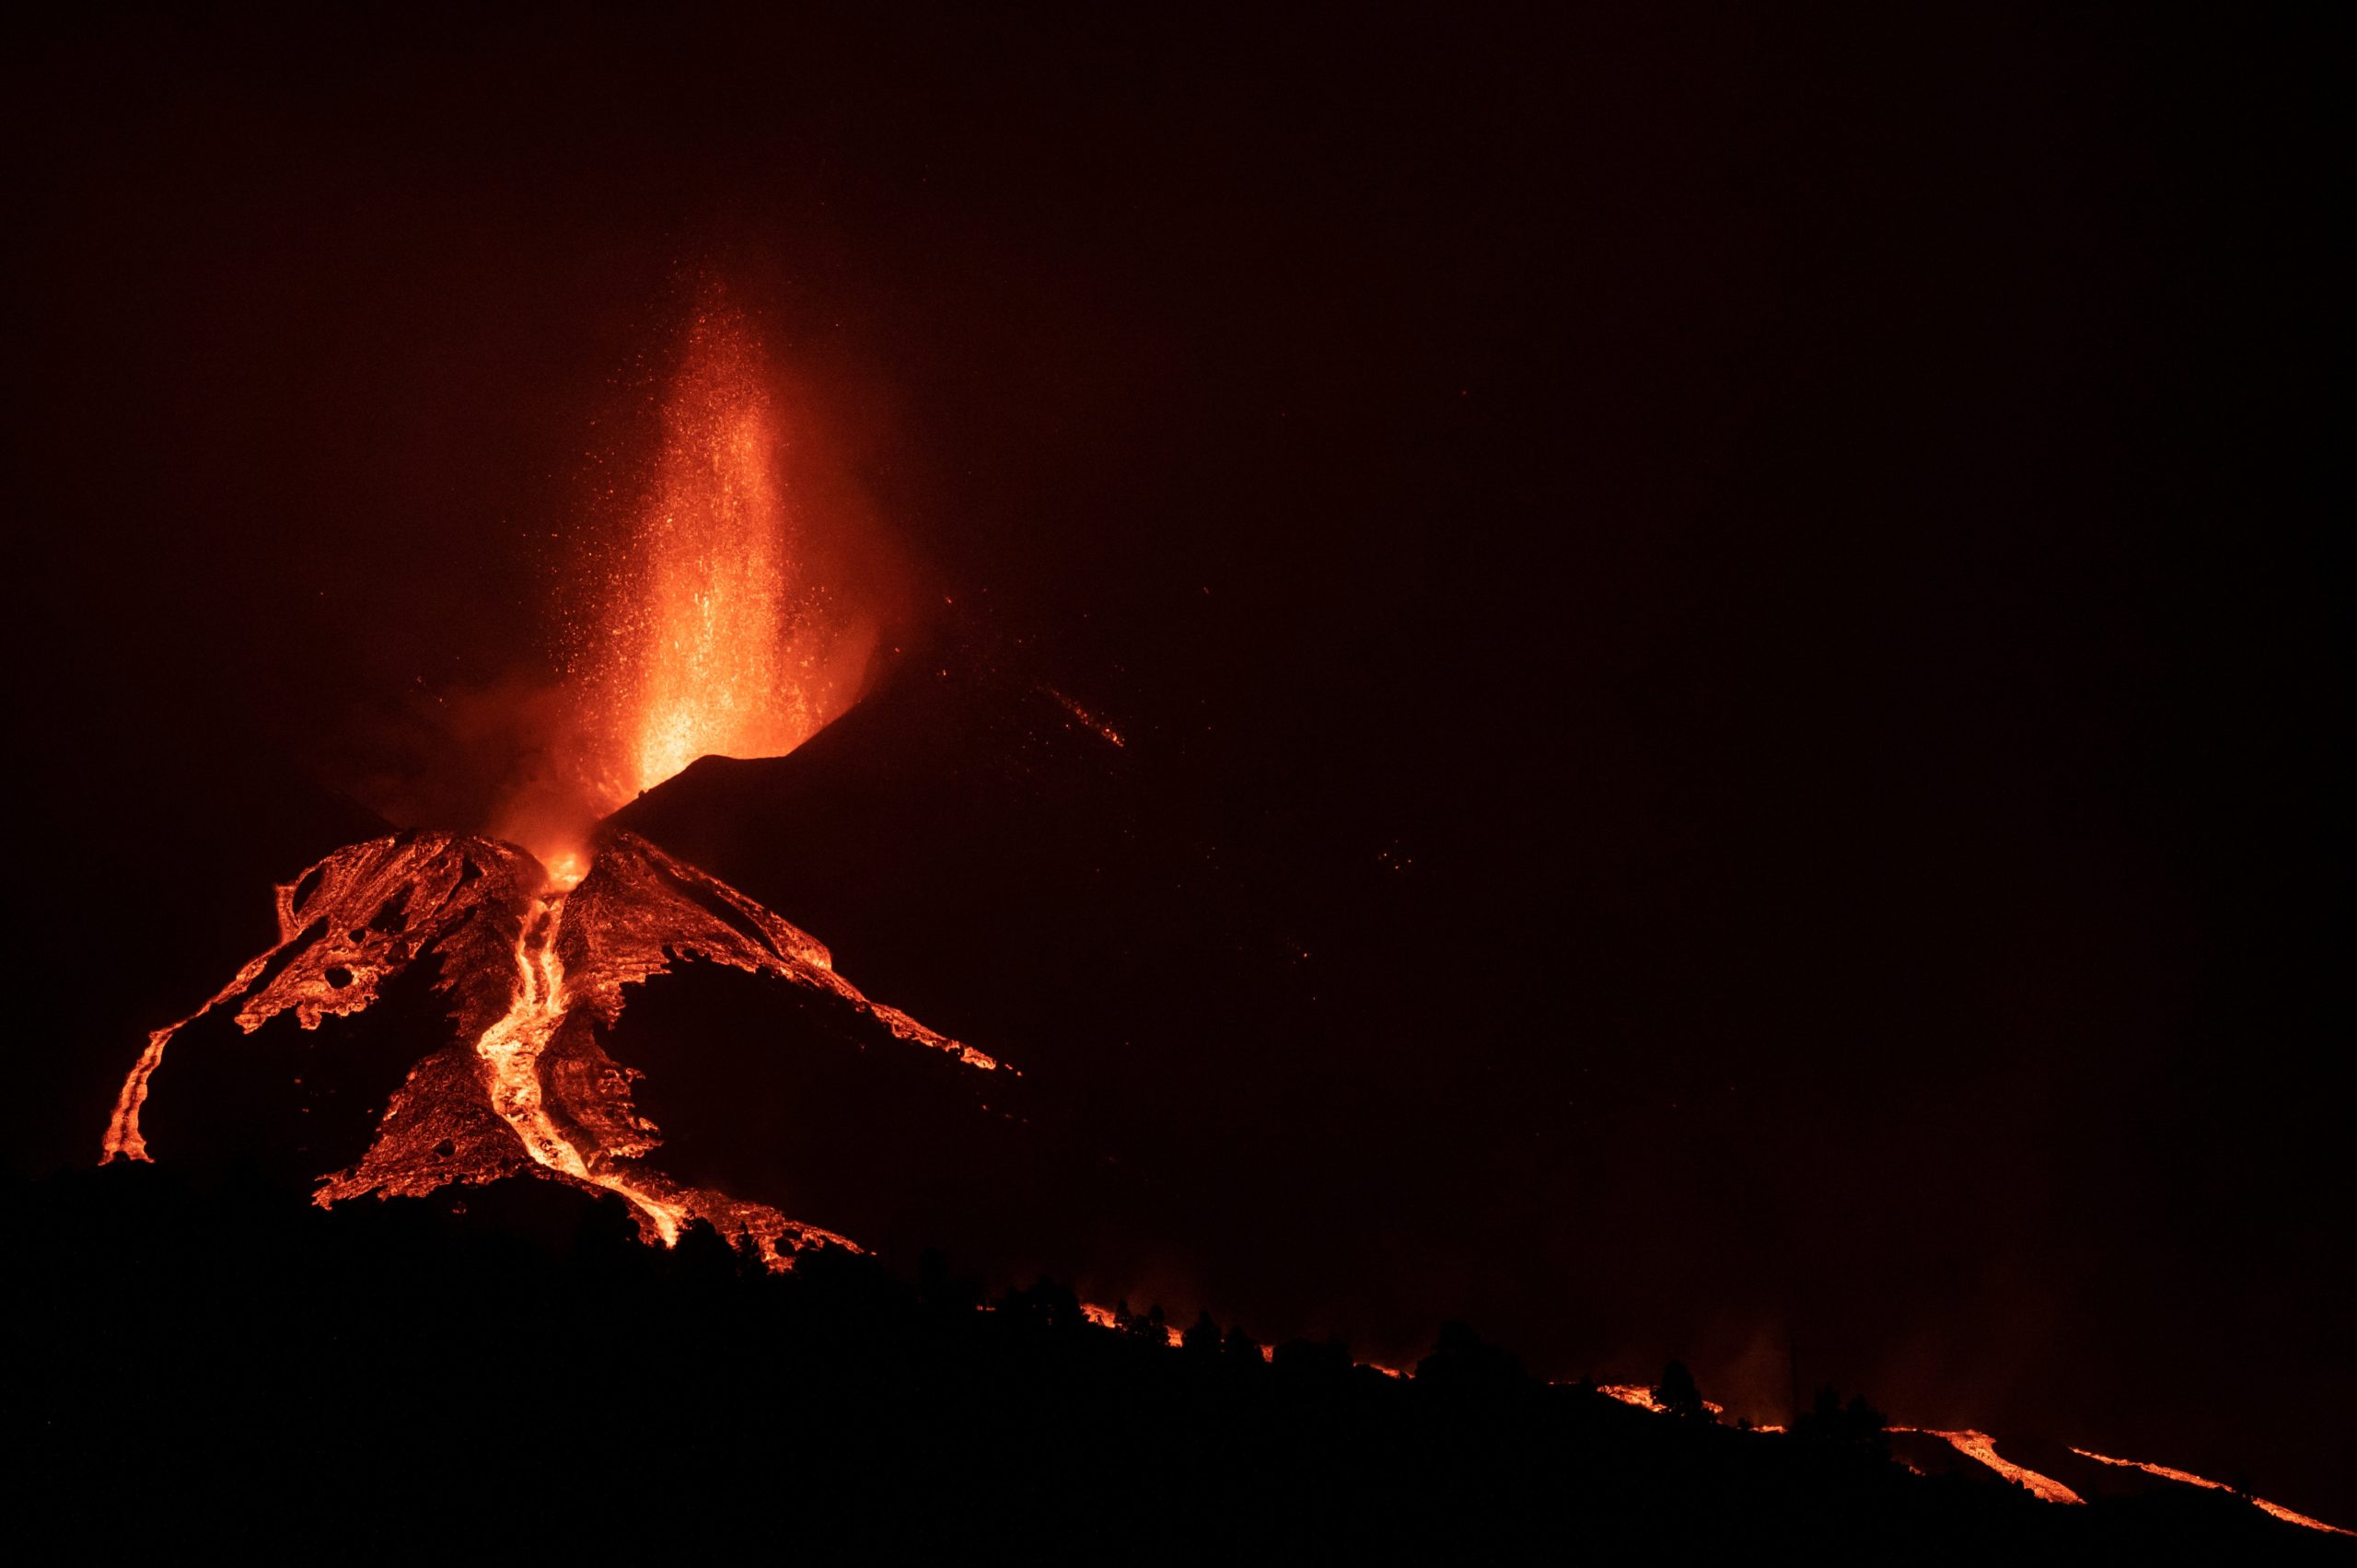 Lava flows after the collapse of a part of the cone of the Cumbre Vieja Volcano on October 10, 2021 in La Palma, Spain. (Photo: Marcos del Mazo, Getty Images)